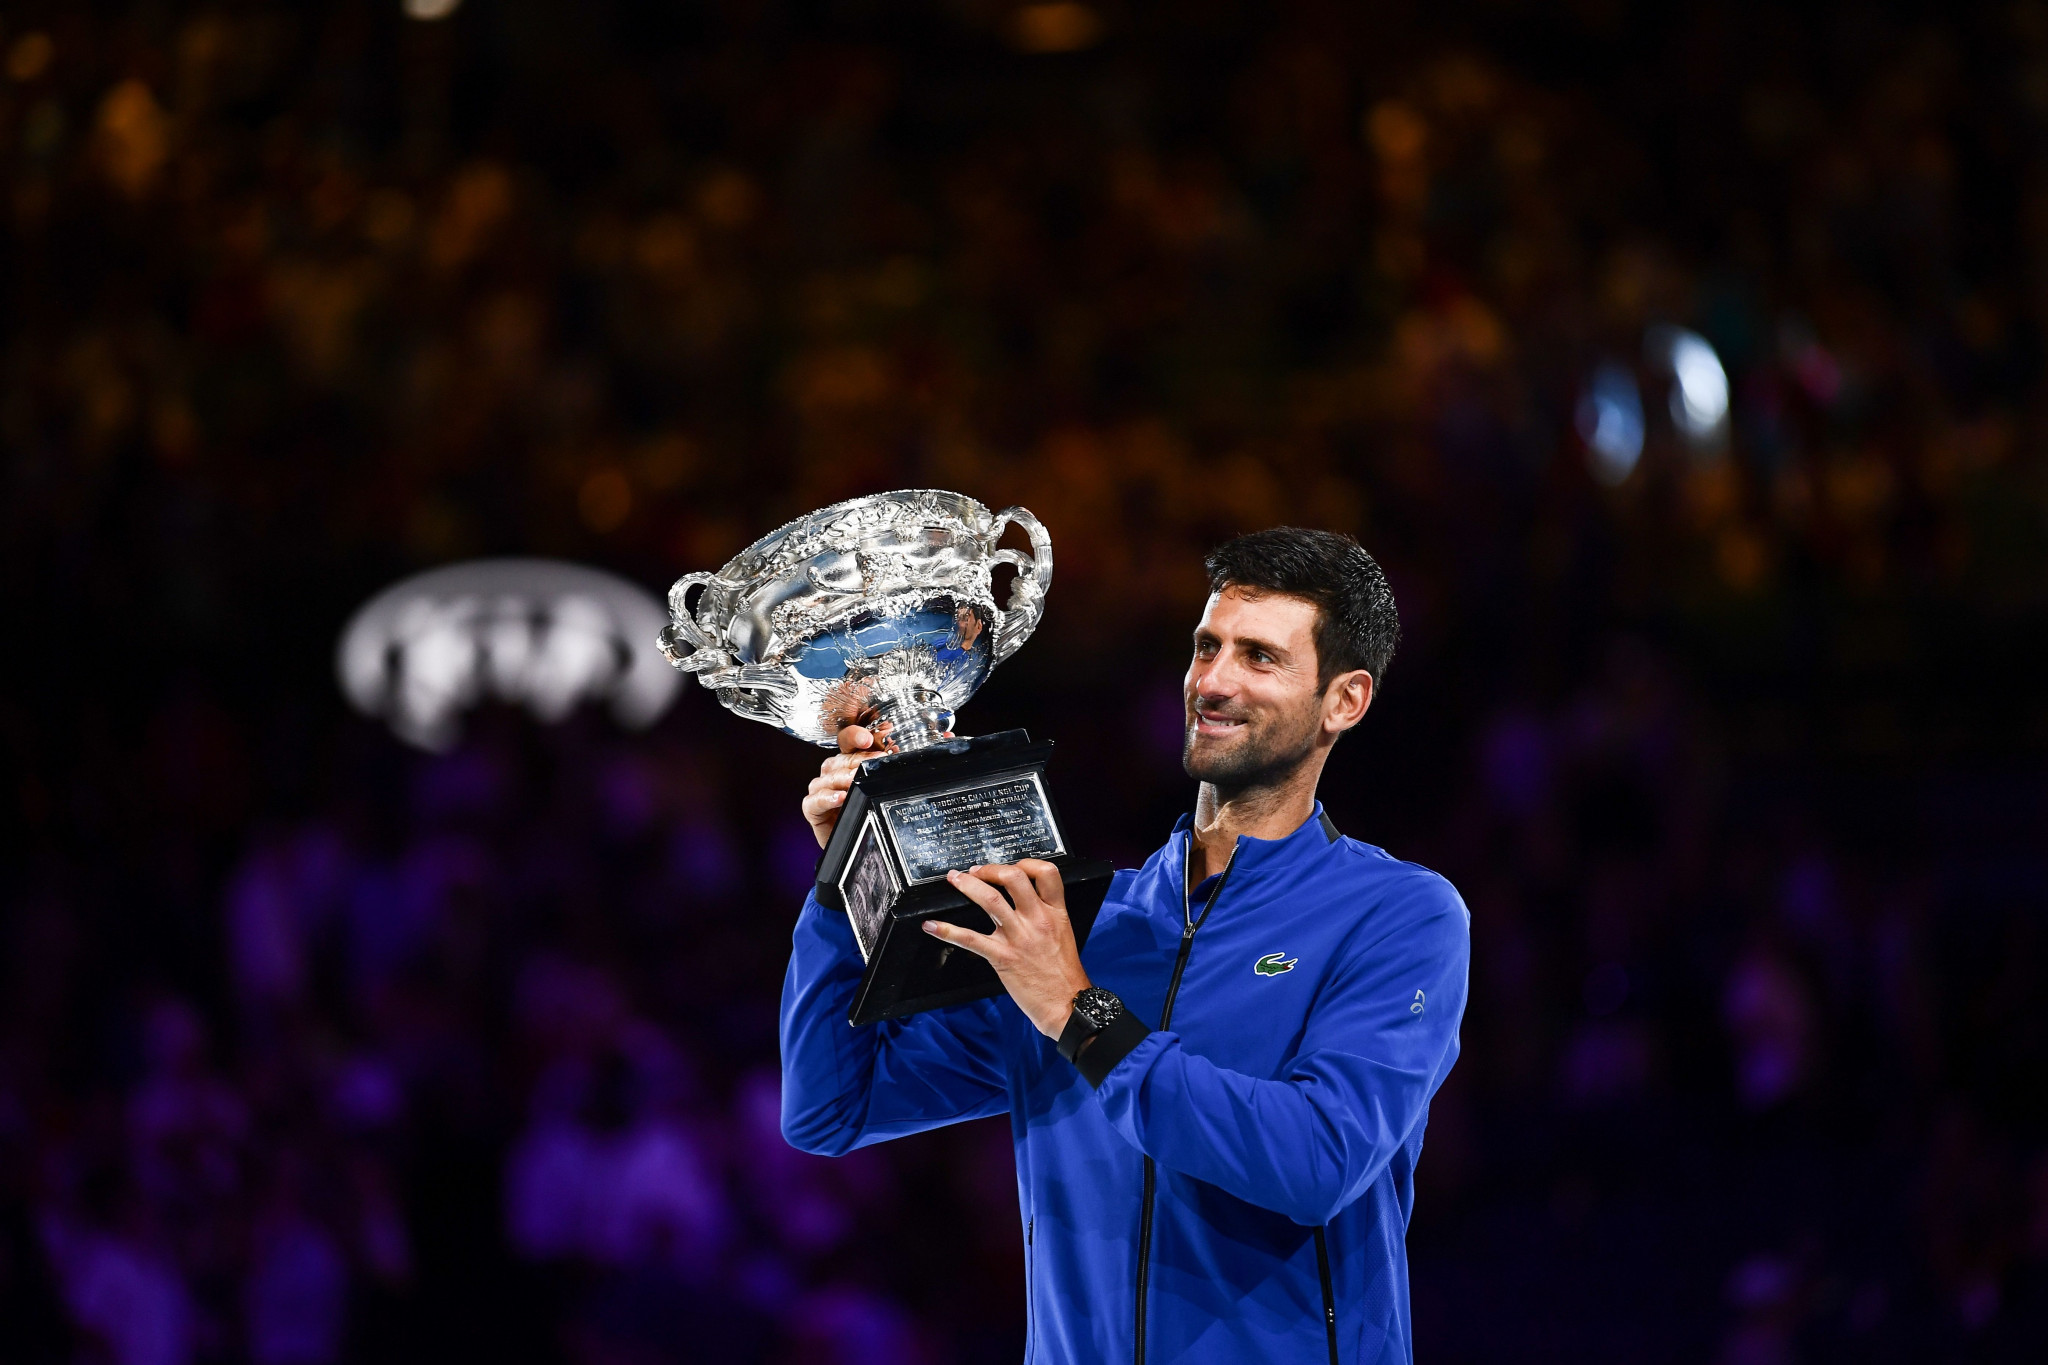 Nadal no match for Djokovic as Serbian claims seventh Australian Open crown